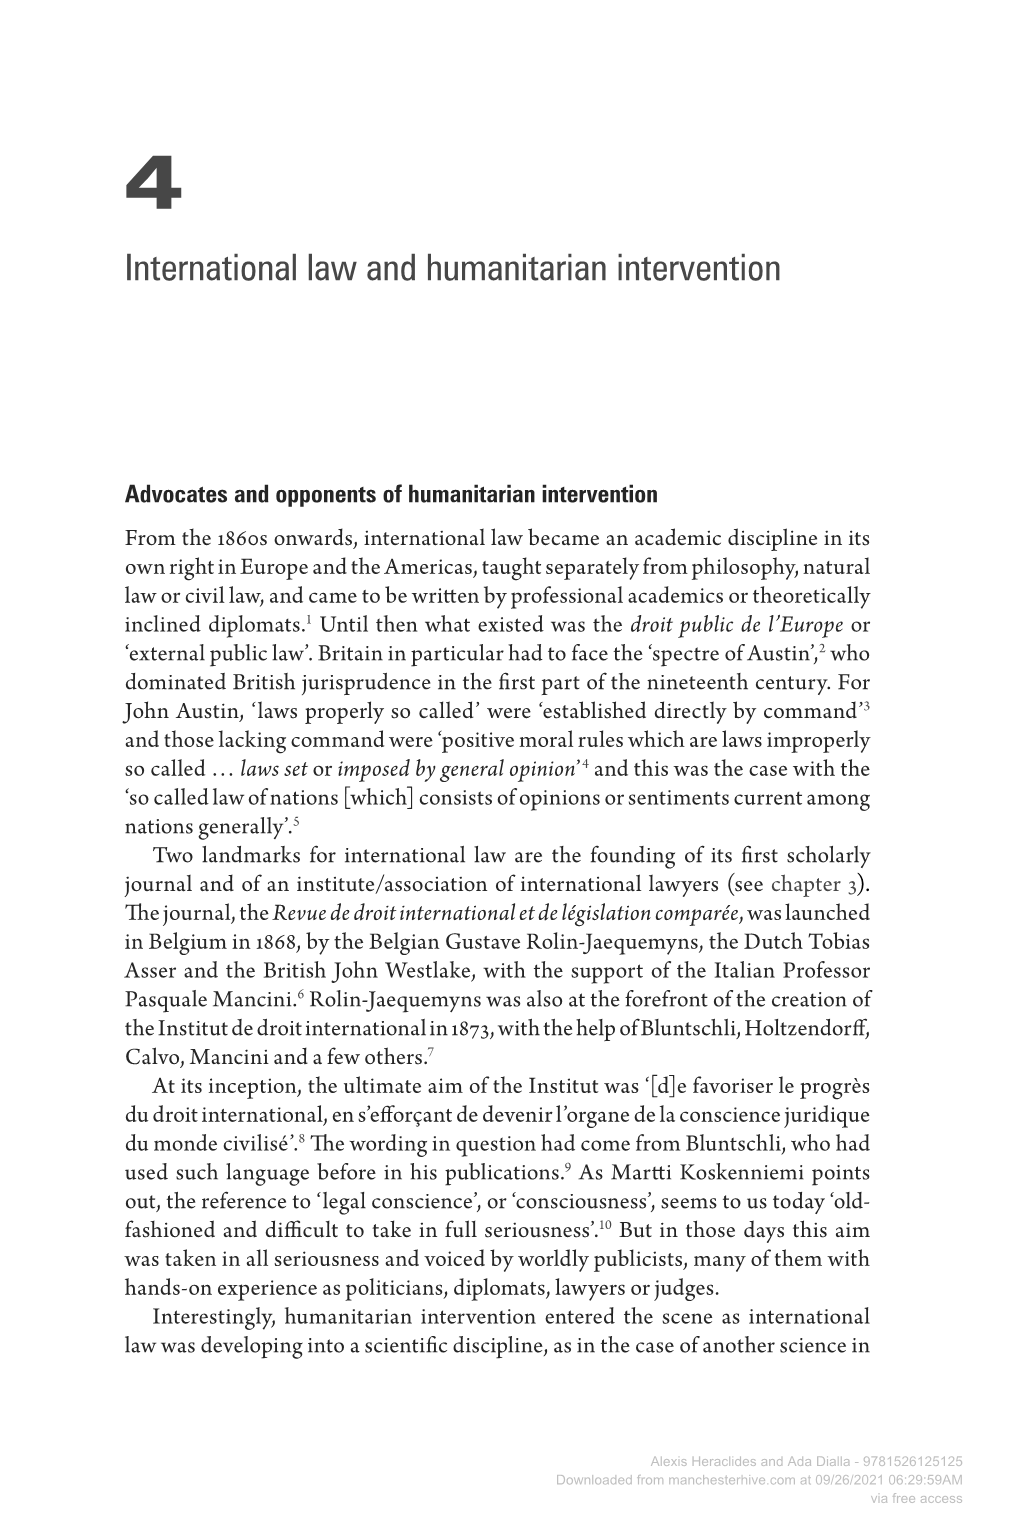 Humanitarian Intervention in the Long Nineteenth